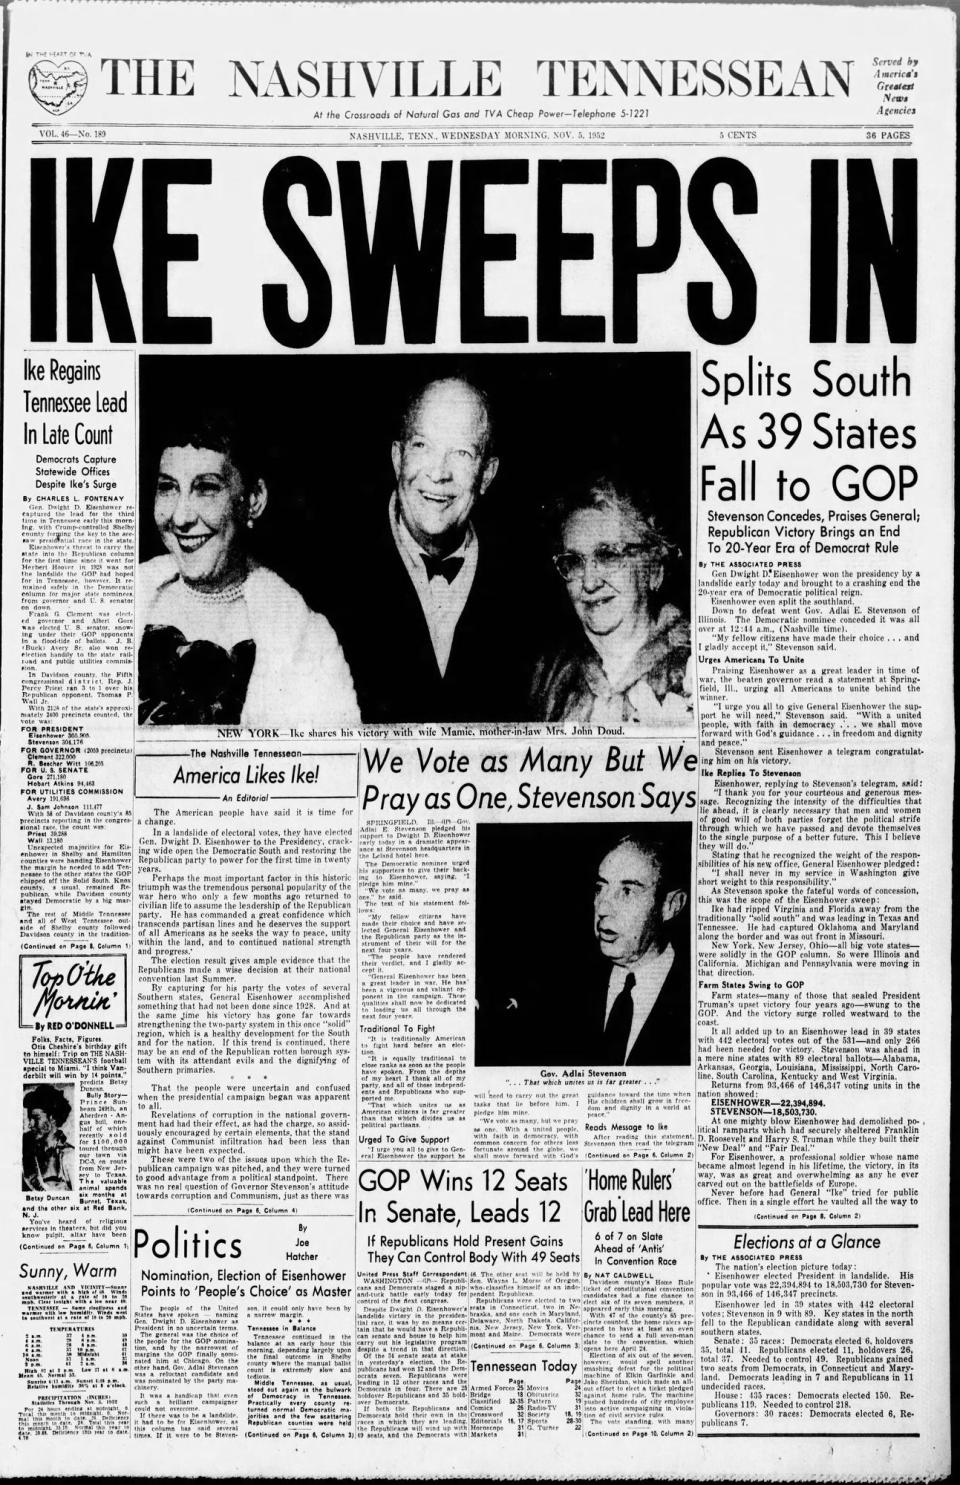 The front page of the Nov. 5, 1952, Tennessean announces Dwight D. Eisenhower's win in the the presidential election.